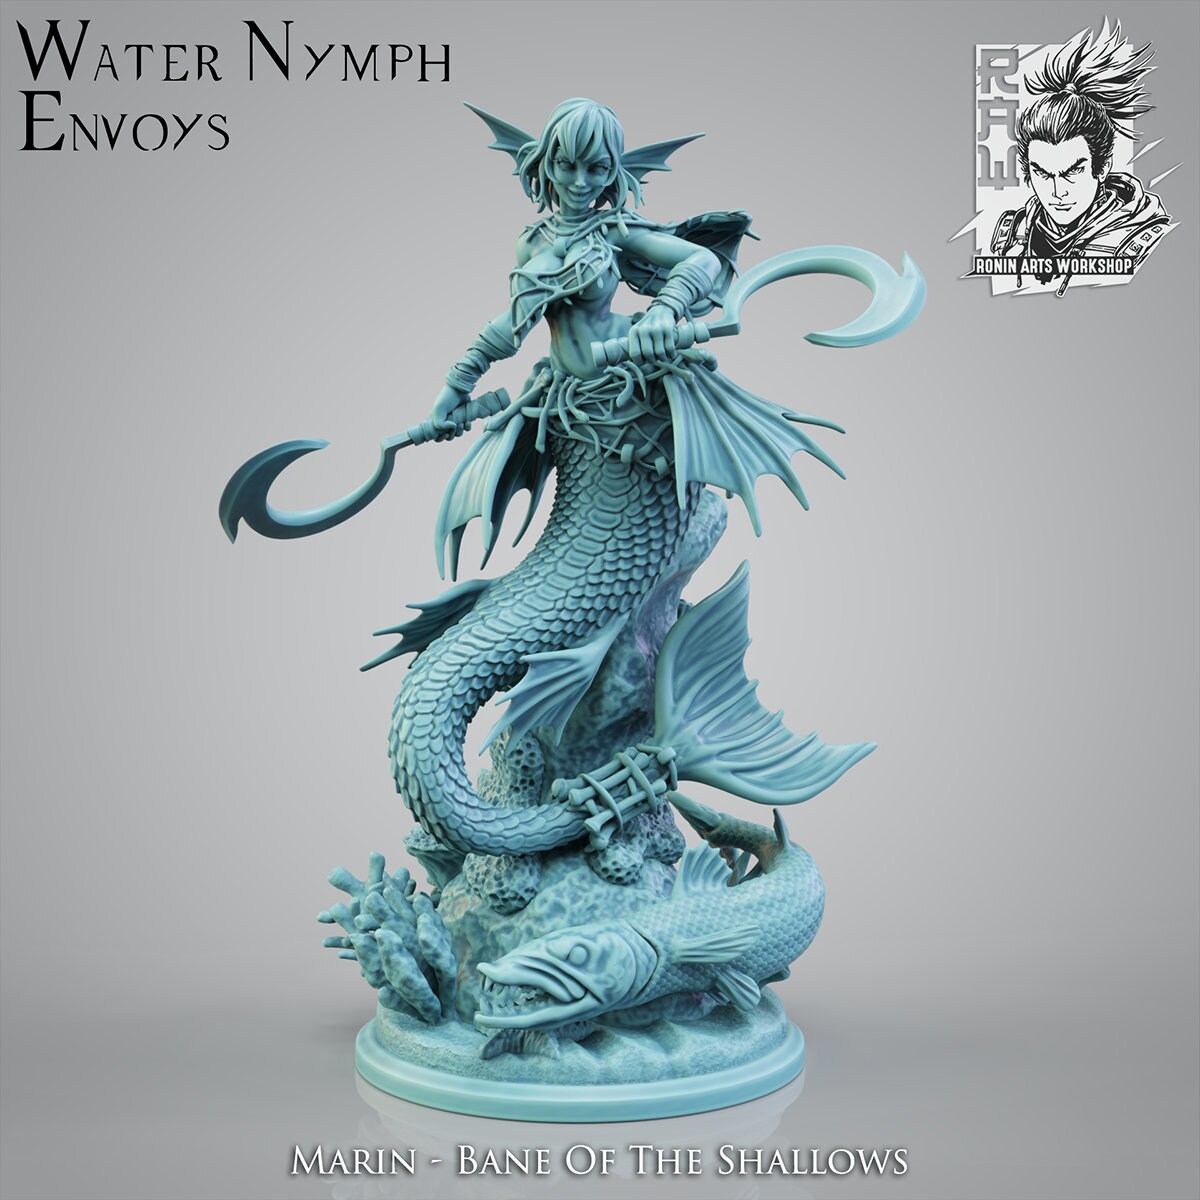 Marin the Servant Girl / Water Nymph | 35mm/54mm | NSFW Nymph Available | Resin 3D Printed Miniature | Ronin Arts Workshop